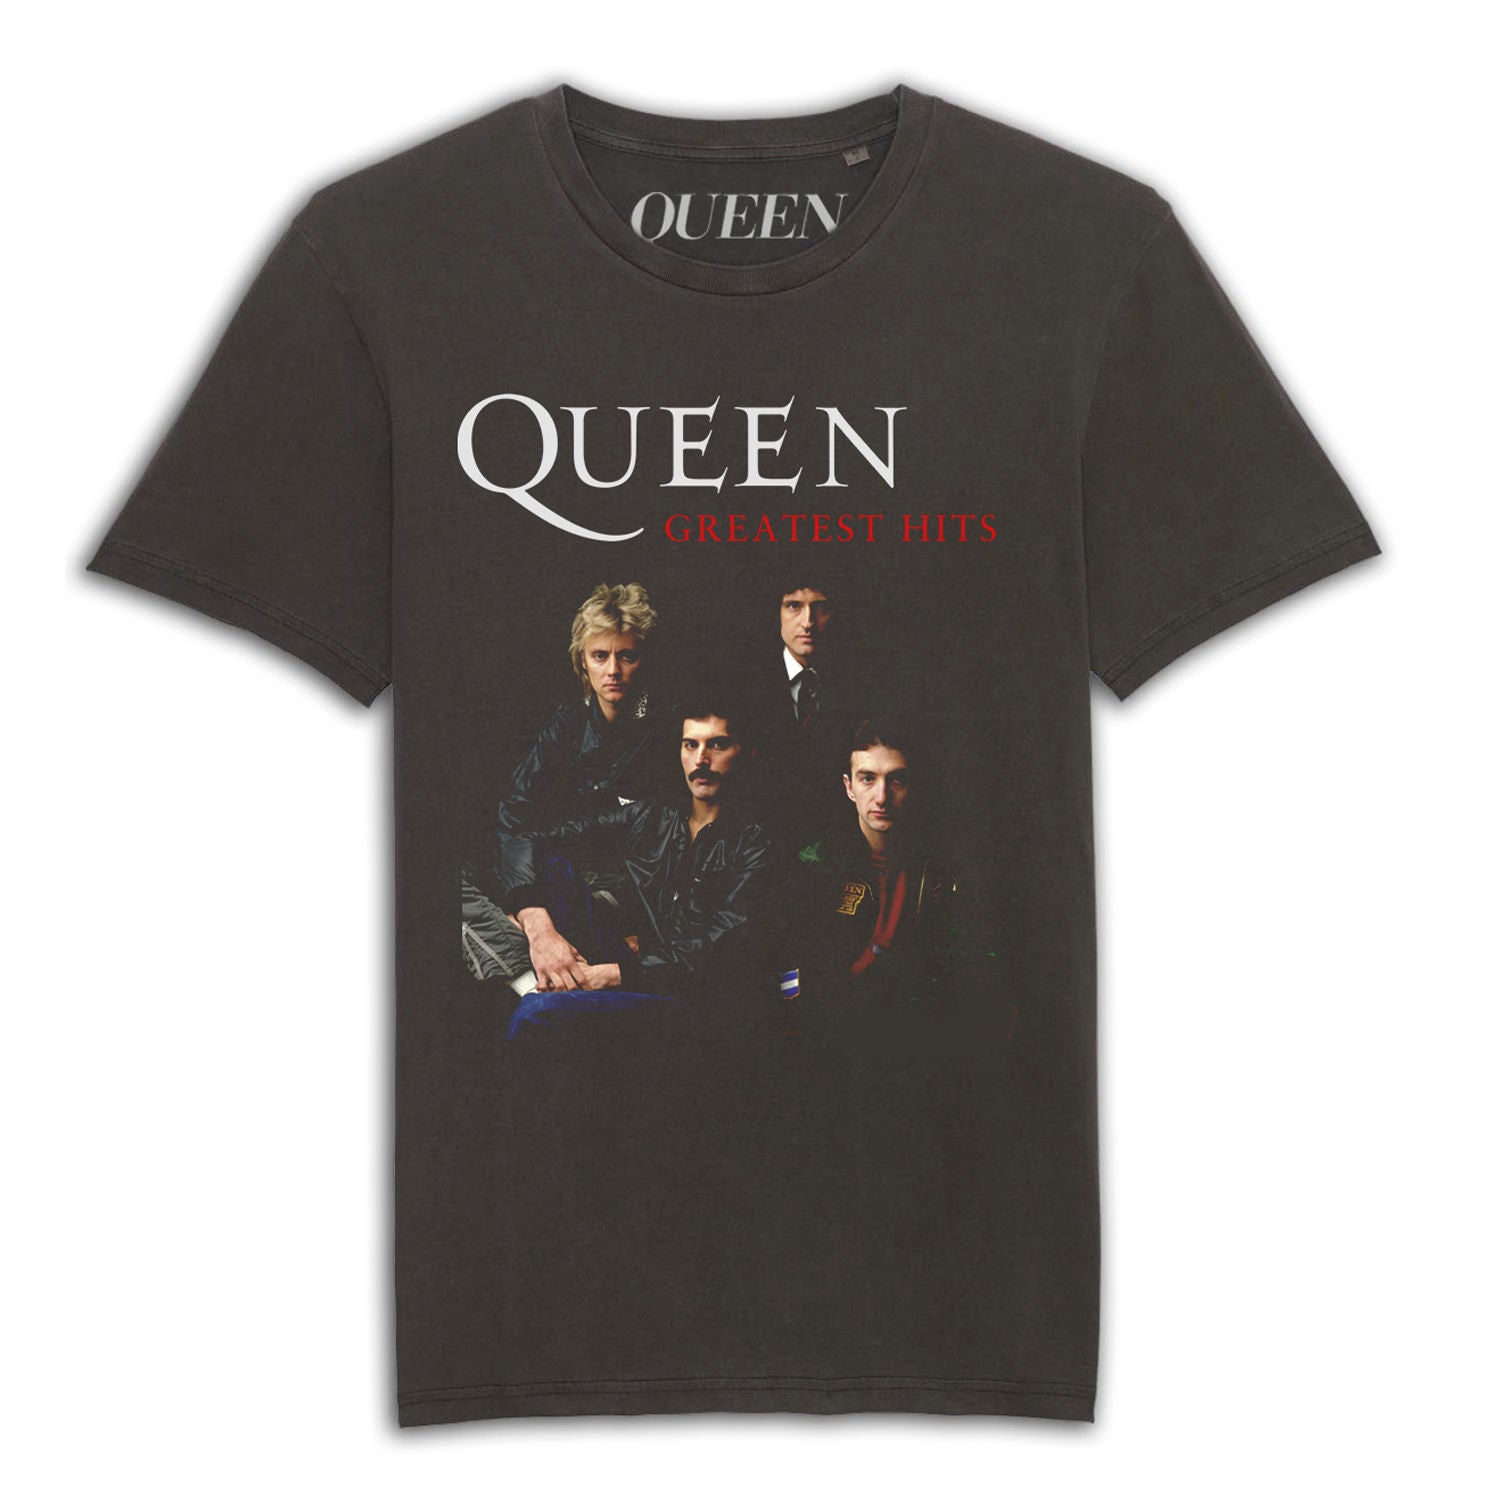 Queen - Greatest Hits 'Vintage' style T-Shirt